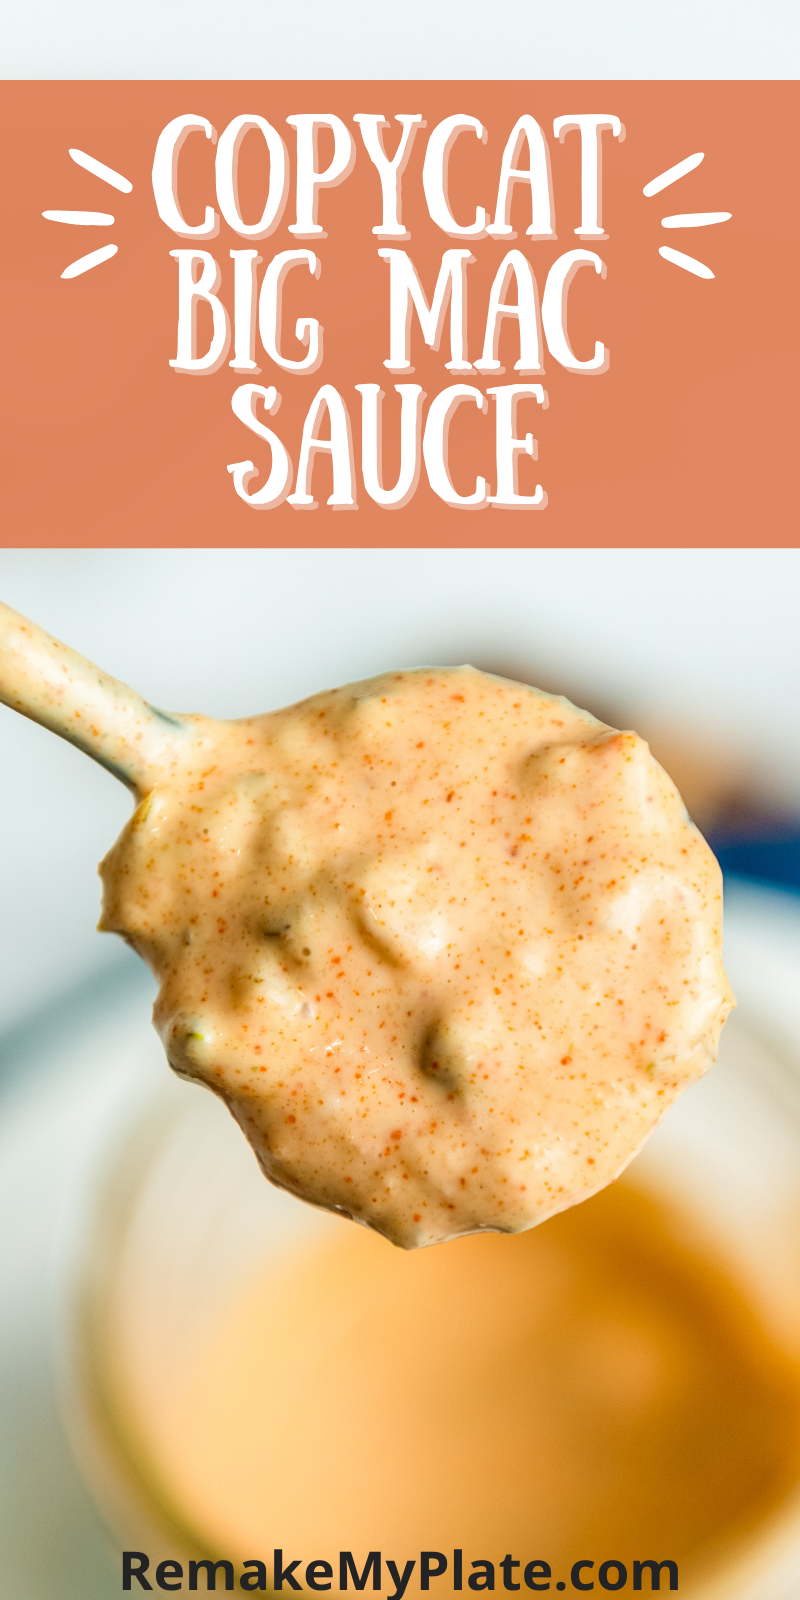 In just a few minutes you can whip up this copycat McDonald’s Big Mac Sauce recipe to enjoy at home. Use it to top your burgers, salads and as a dipping sauce for french fries, onion rings, tater tots as well as chicken tenders and nuggets